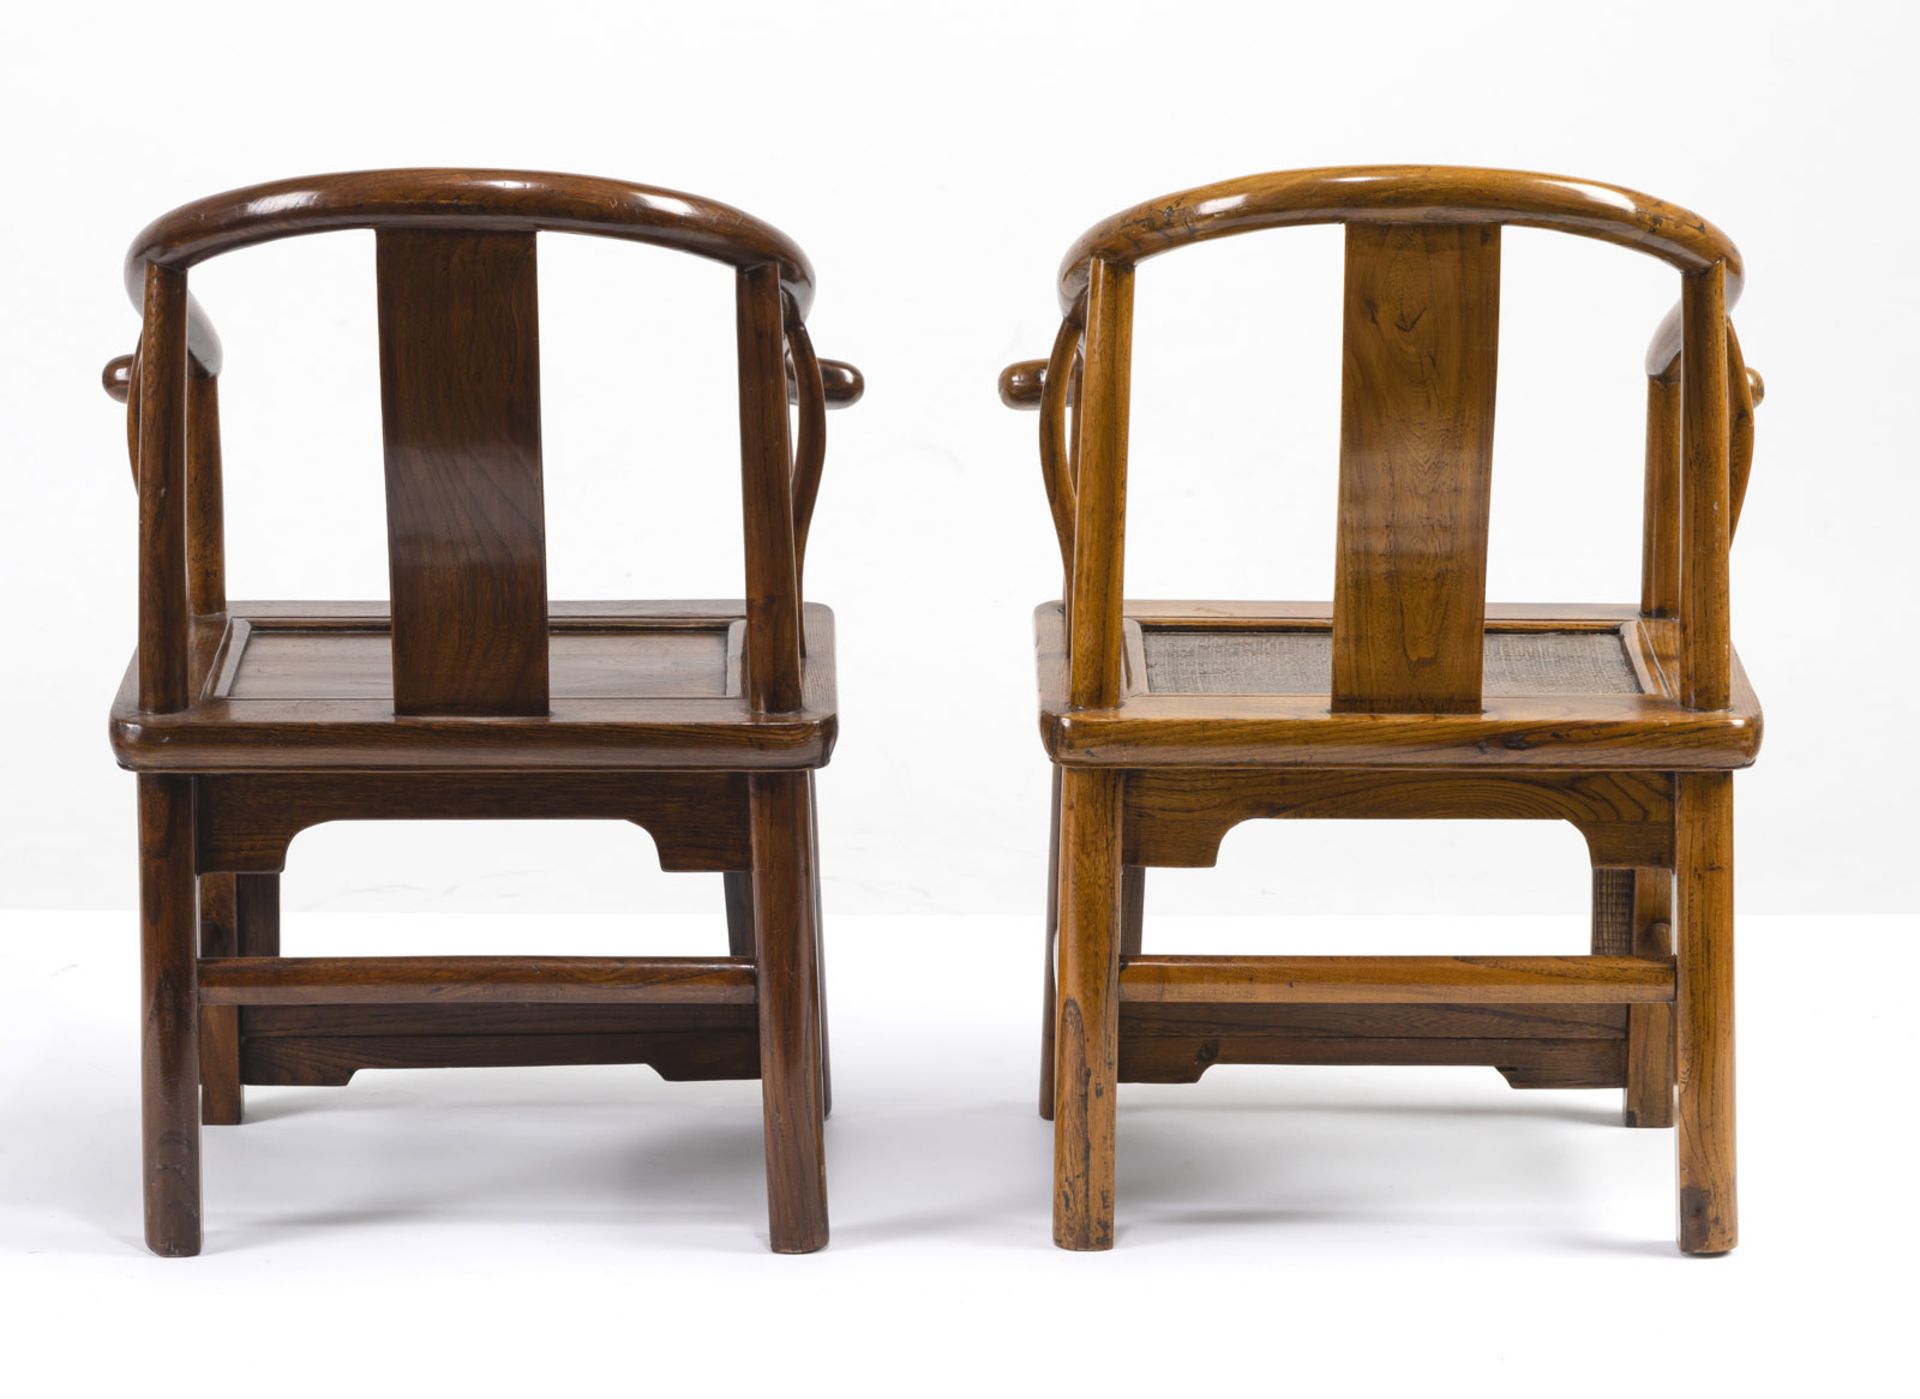 TWO WOODEN HORSESHOE-BACK ARMCHAIRS FOR CHILDREN - Image 4 of 5